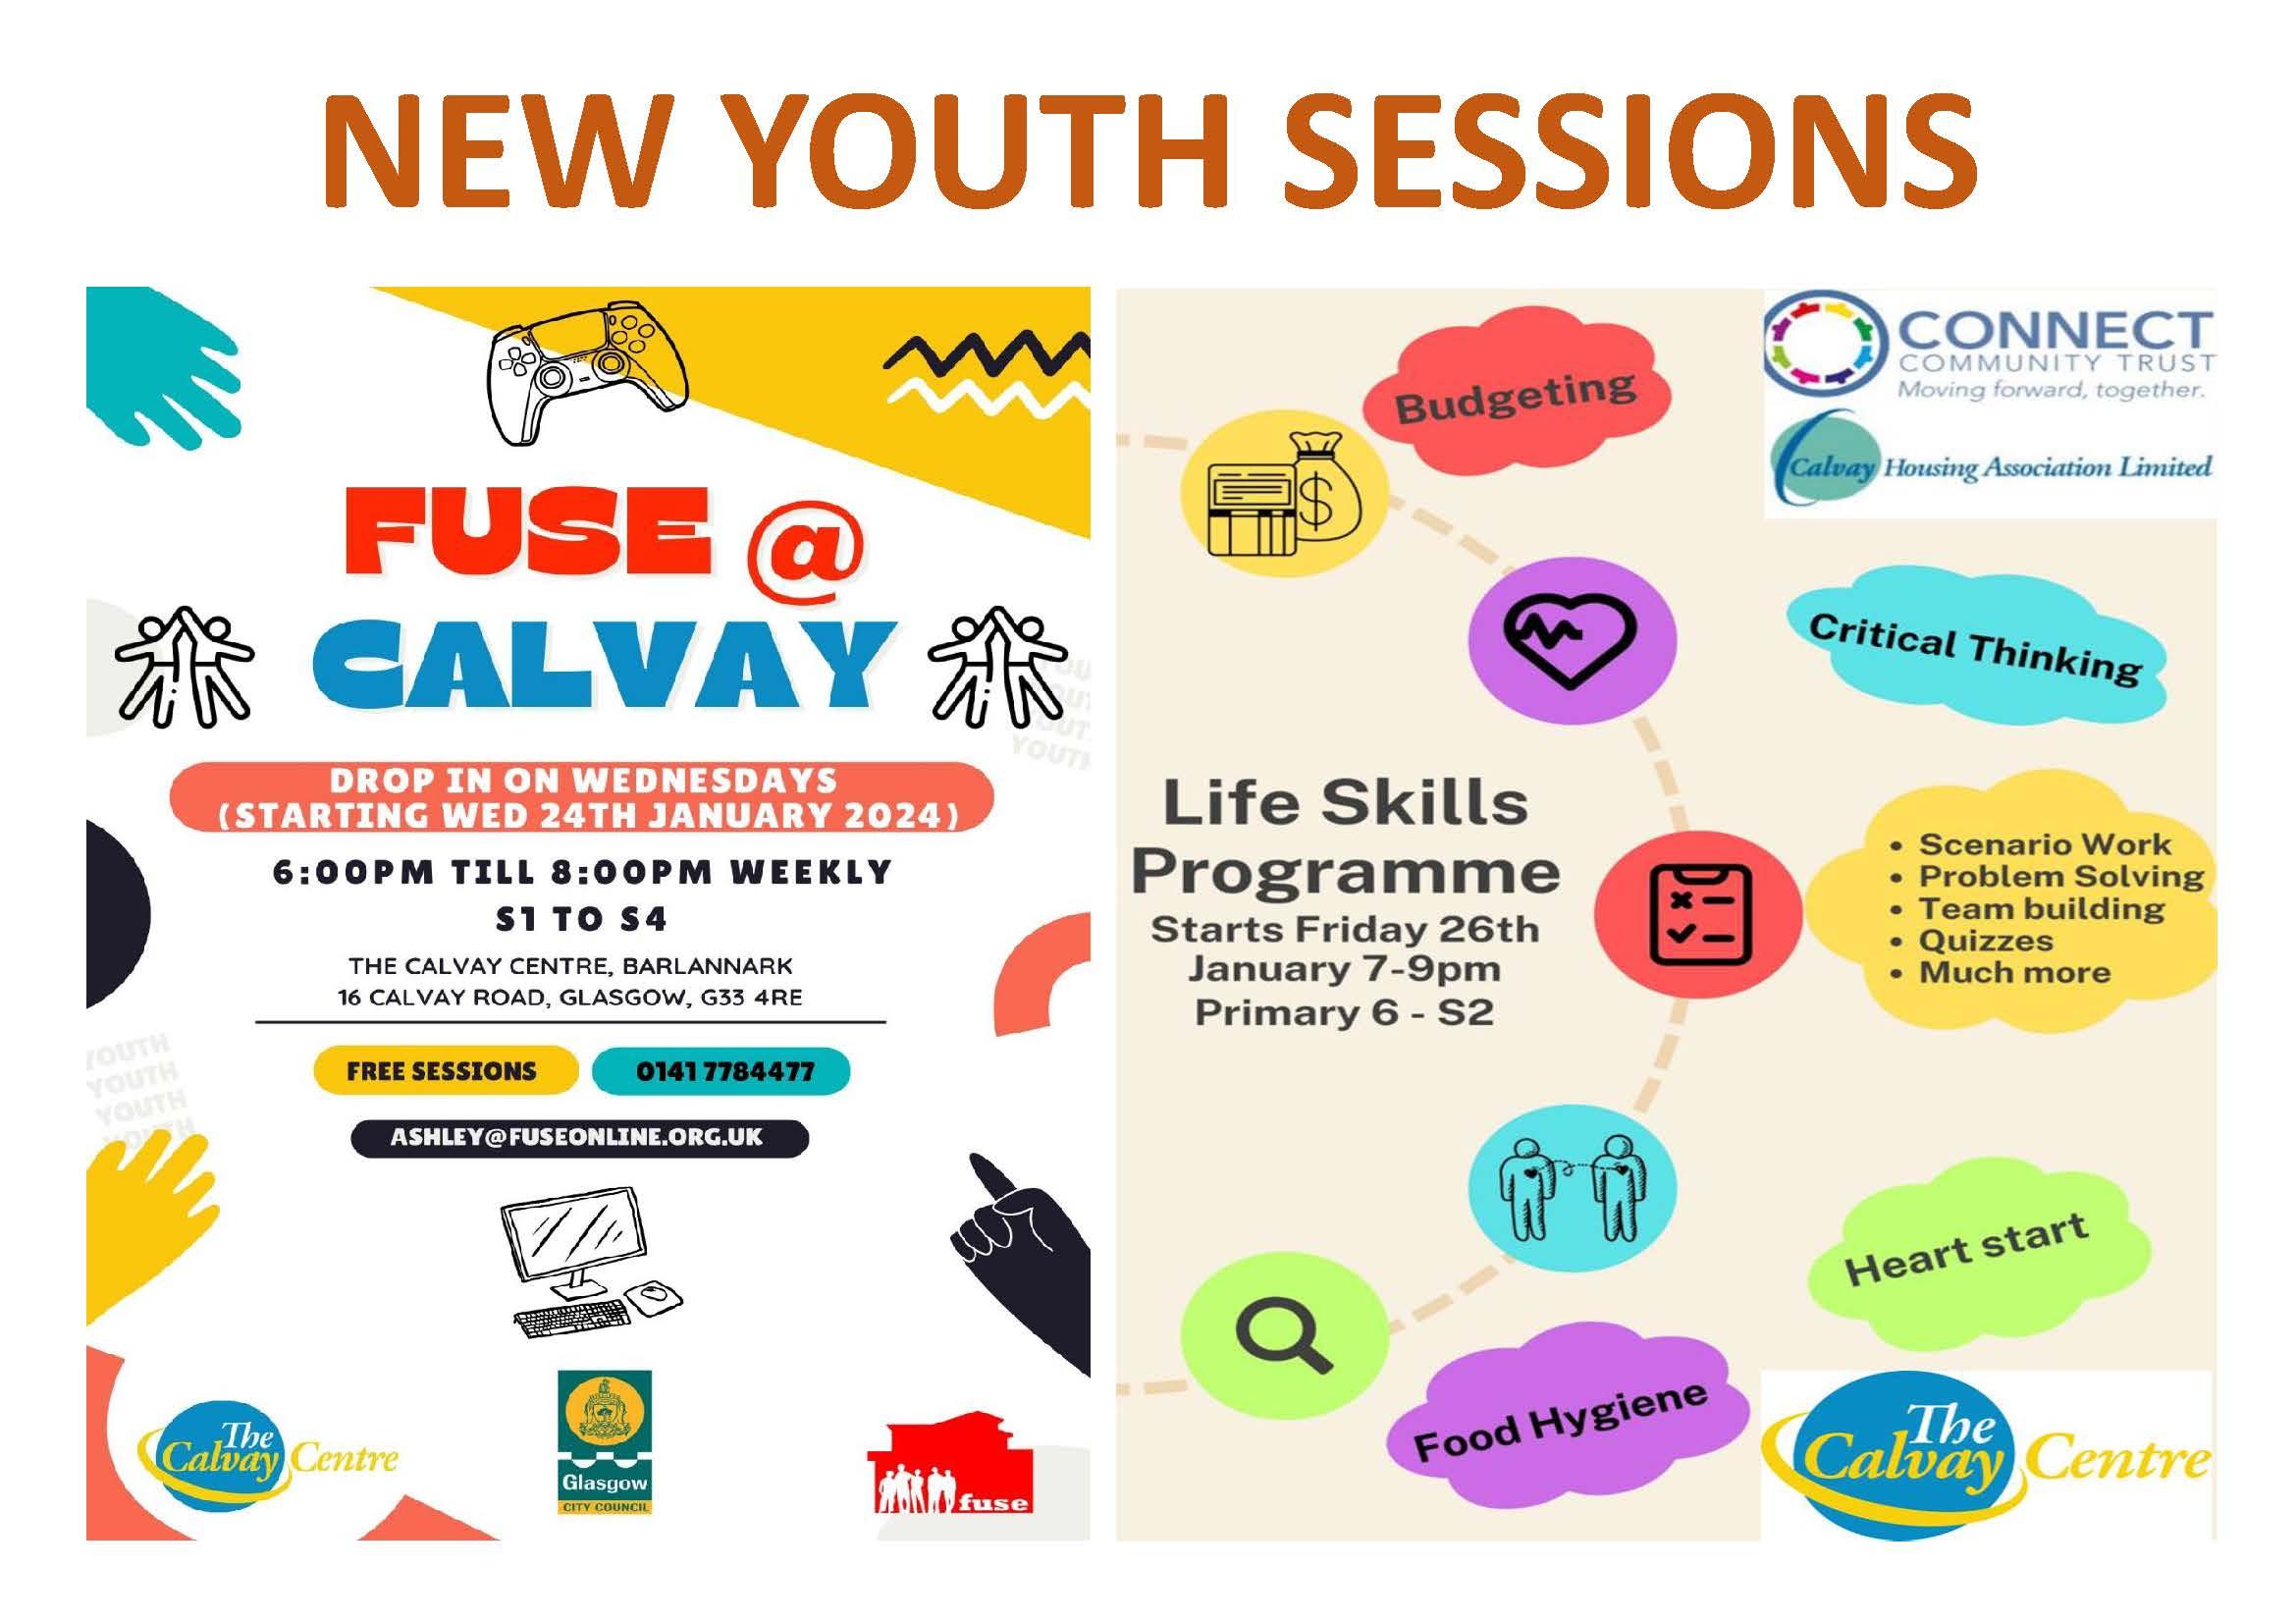 NEW YOUTH SESSIONS